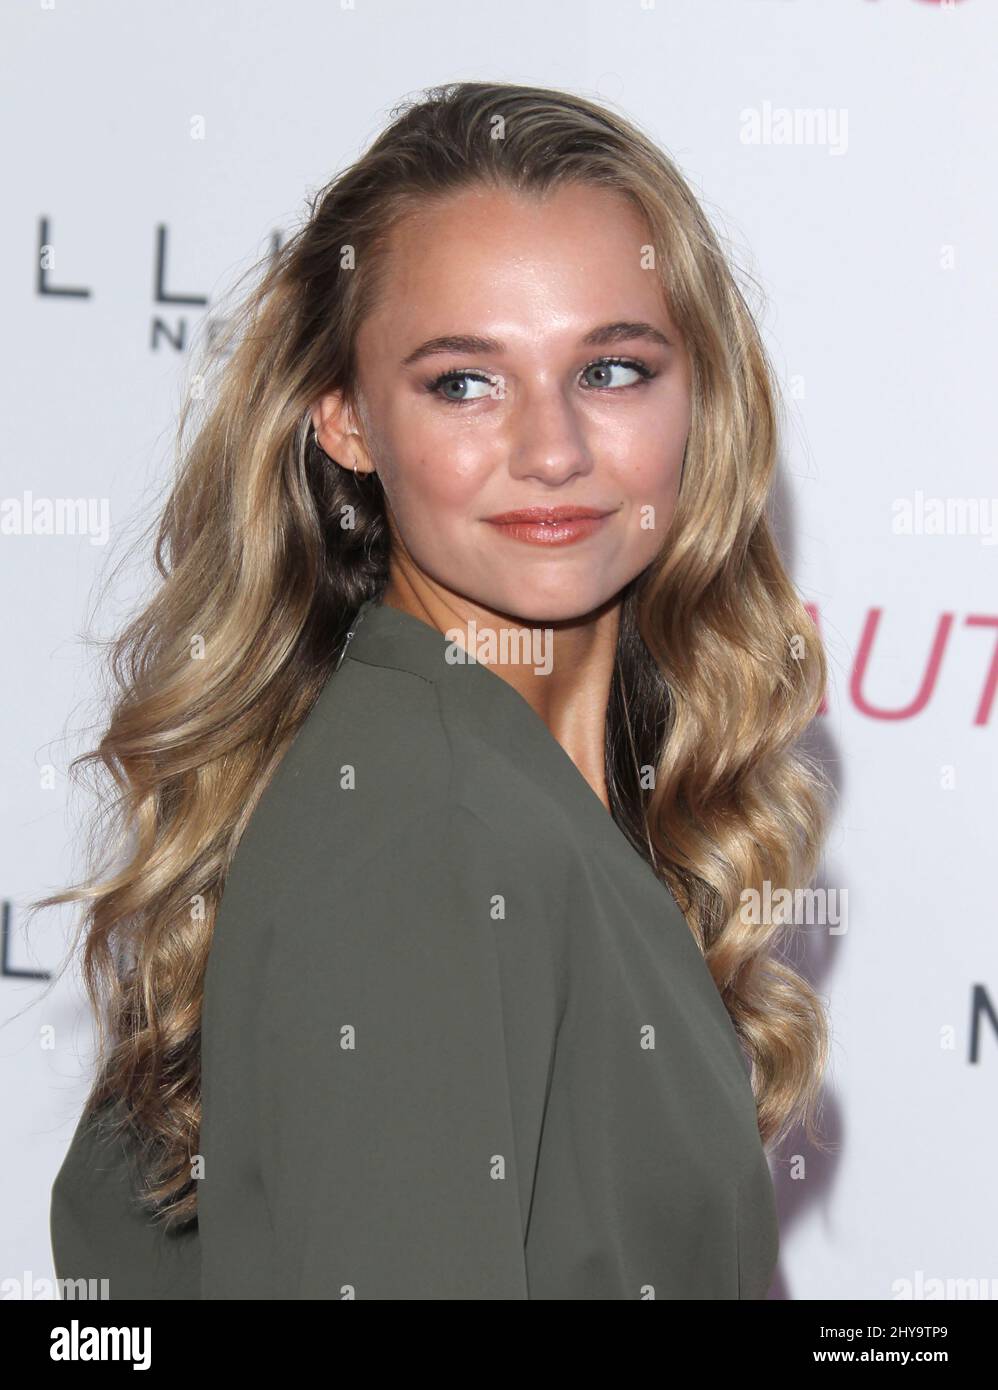 Madison Iseman arriving for the Maybelline New York Beauty Bash held at the  The Line Hotel, June 3, 2016 Los Angeles Stock Photo - Alamy